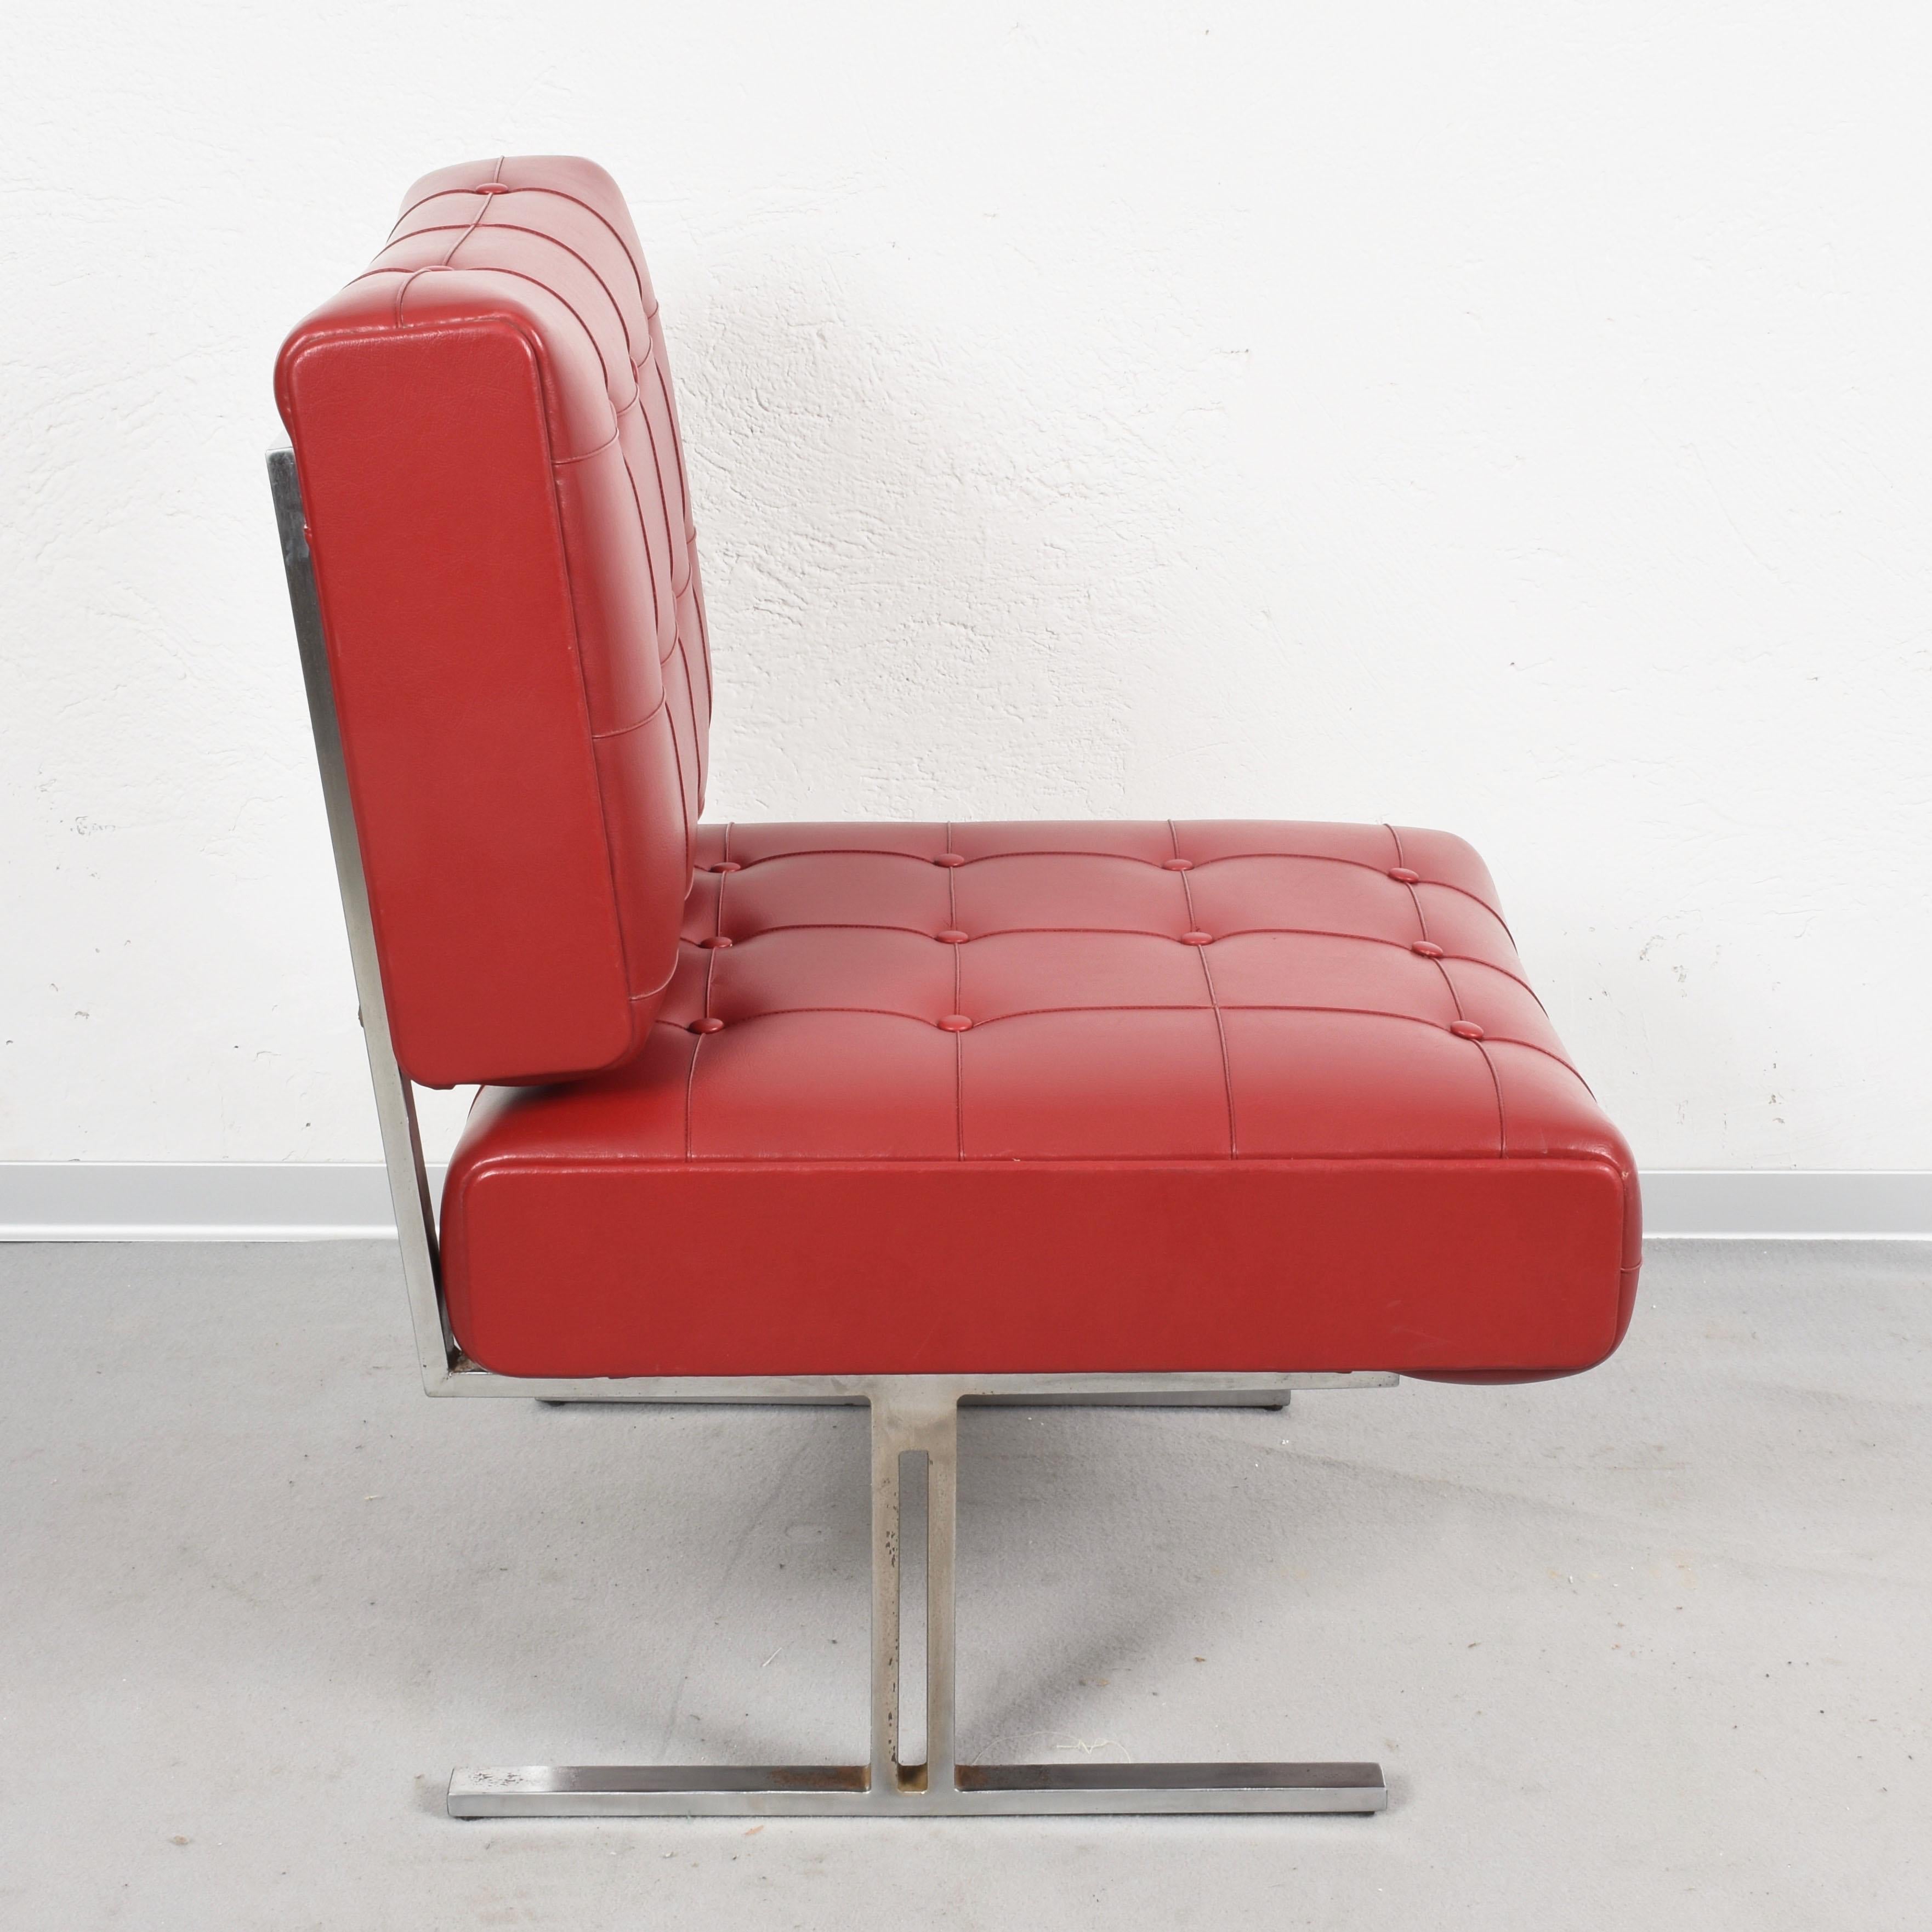 Pair of Steel and Red Faux Leather Armchairs Skay after Hausmann De Sede, 1950s For Sale 1